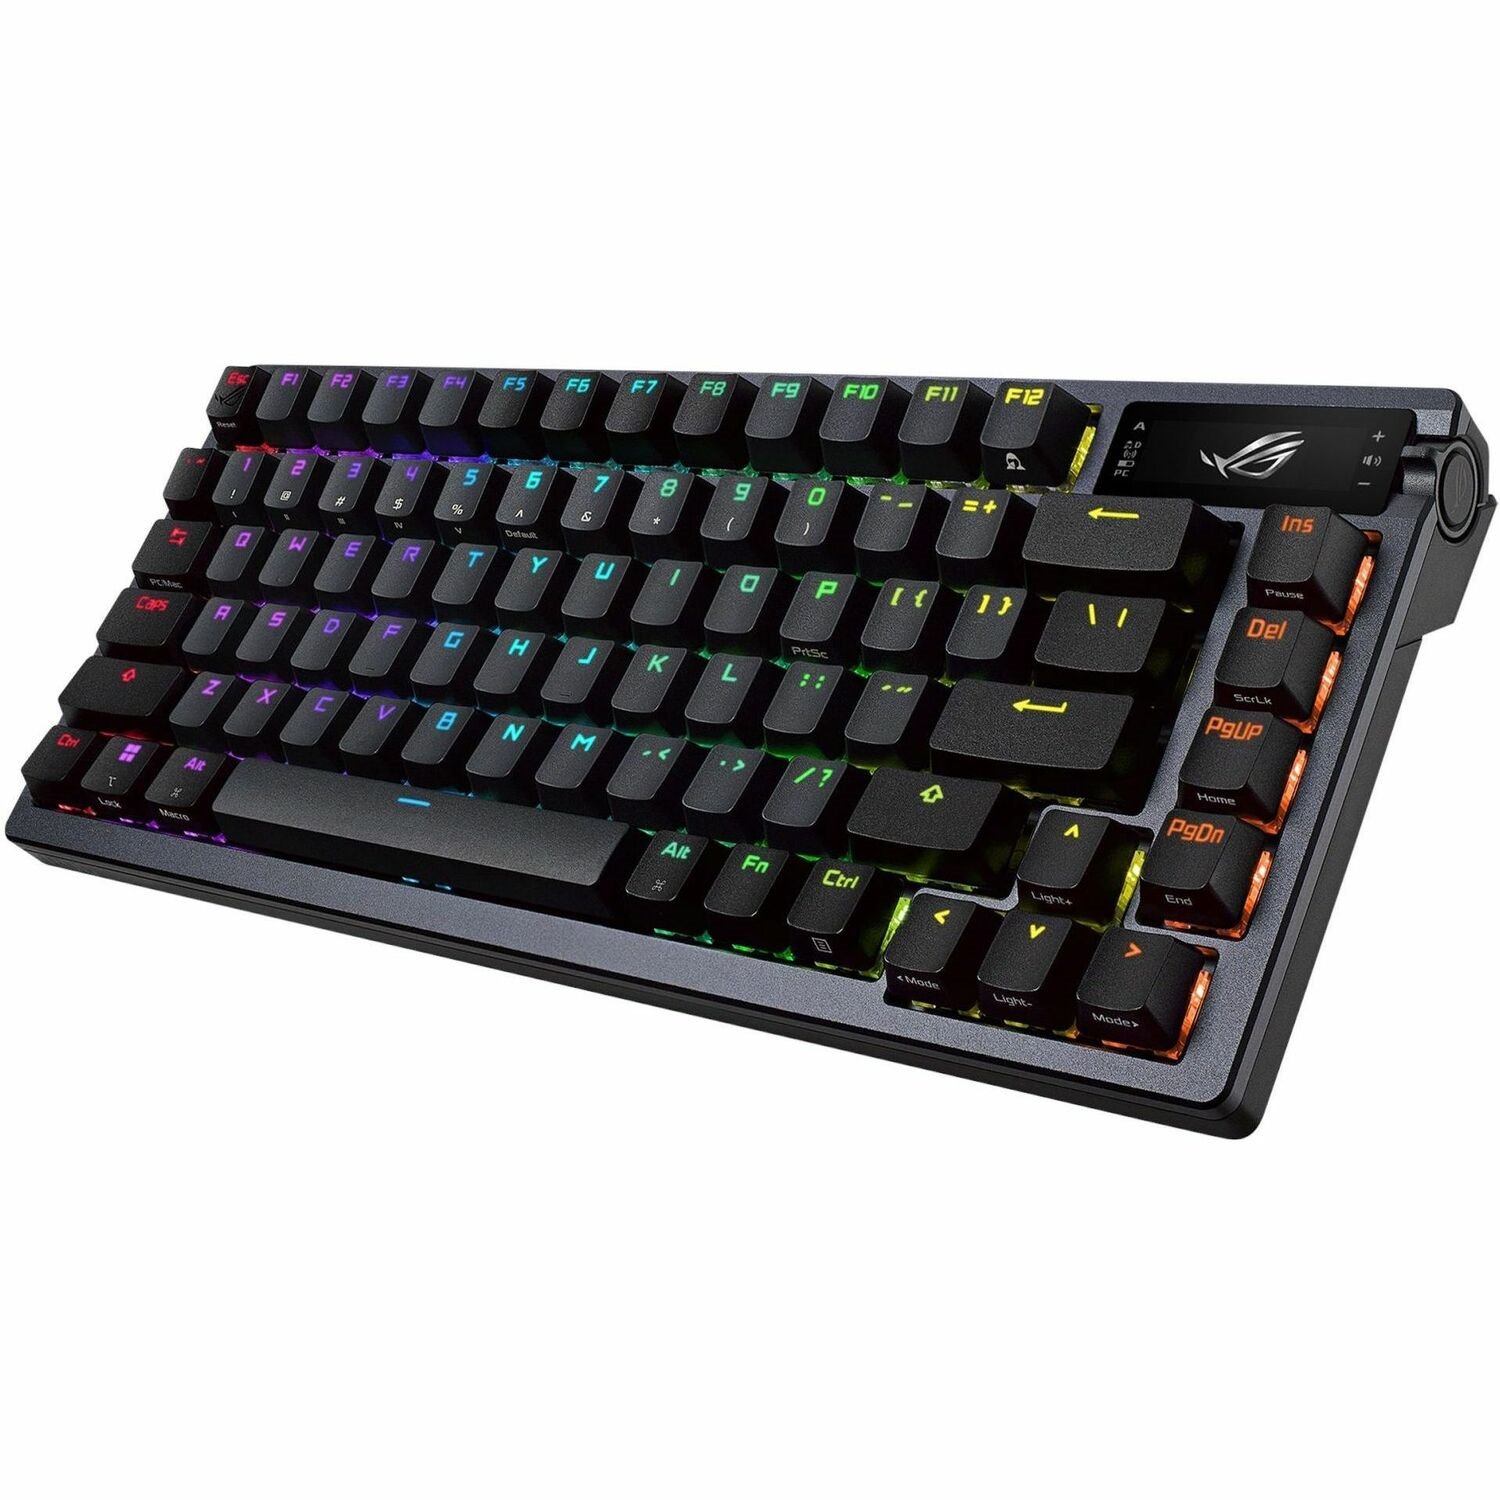 Asus ROG Azoth Gaming Keyboard - Wired/Wireless Connectivity - USB 2.0 Interface - RGB LED - Black